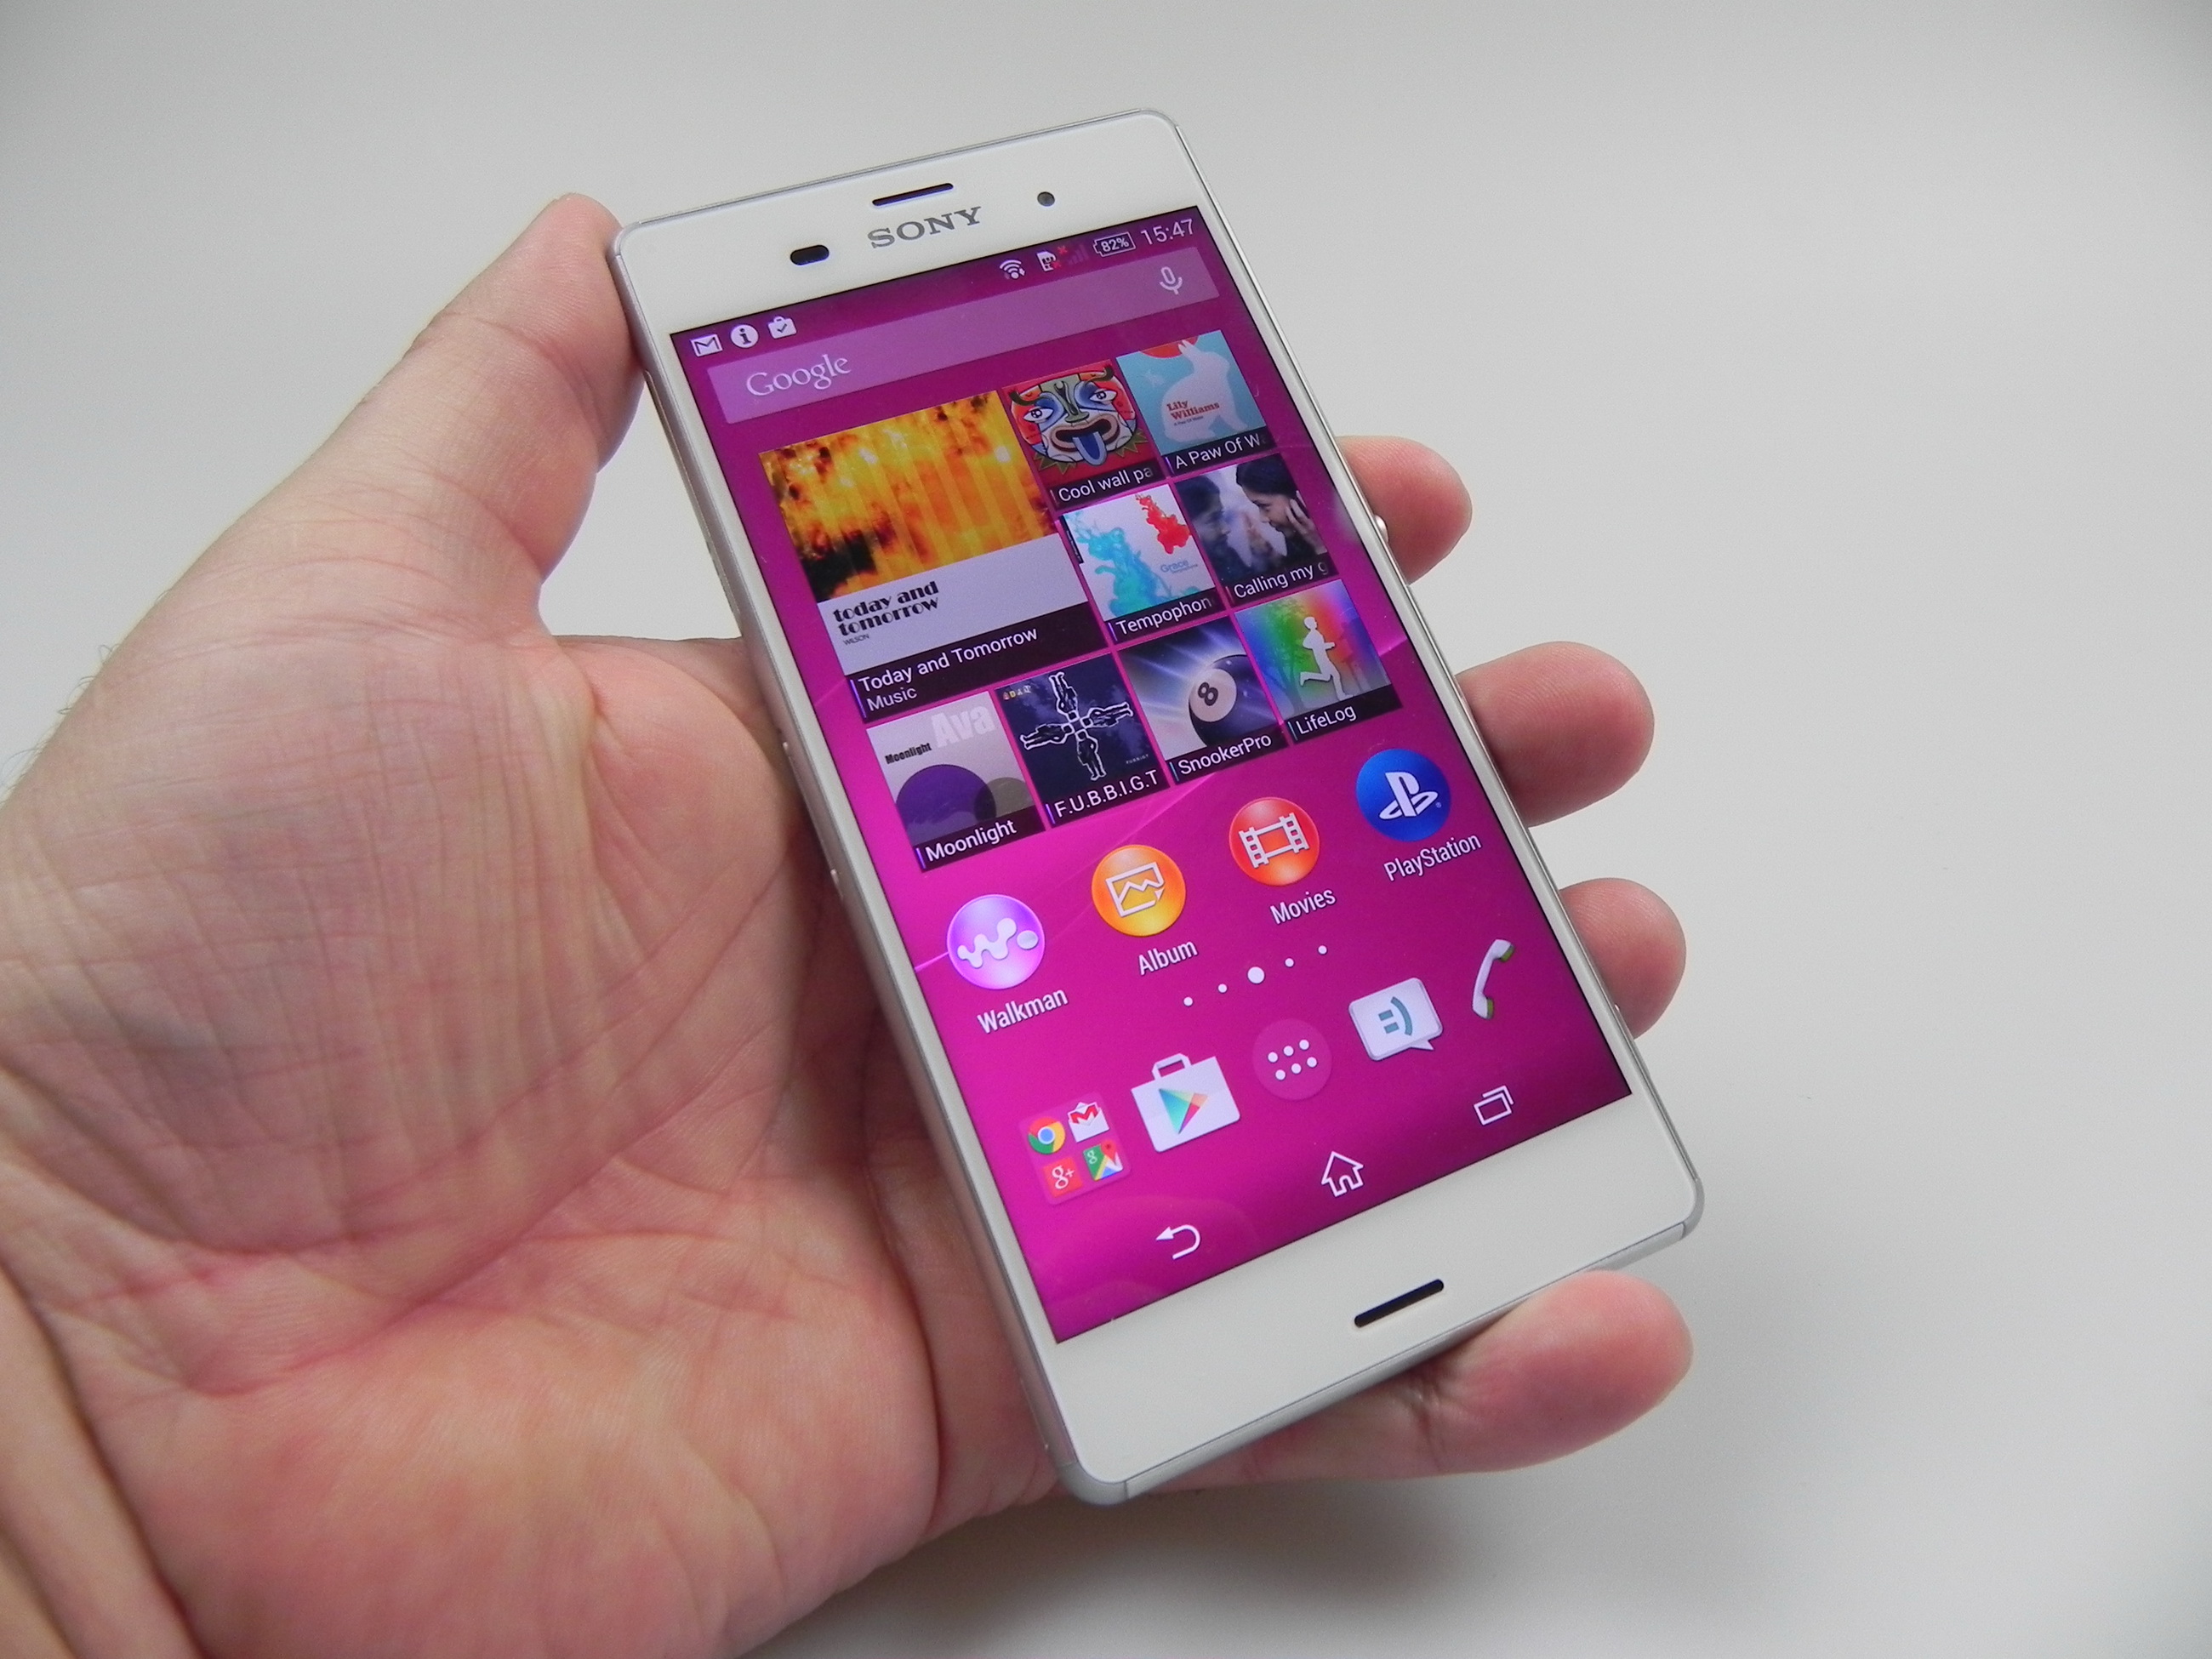 Sony Xperia Z3 Review (Dual SIM): Good Features, Design, but the Packs No Punch and Overheats (Video) | GSMDome.com